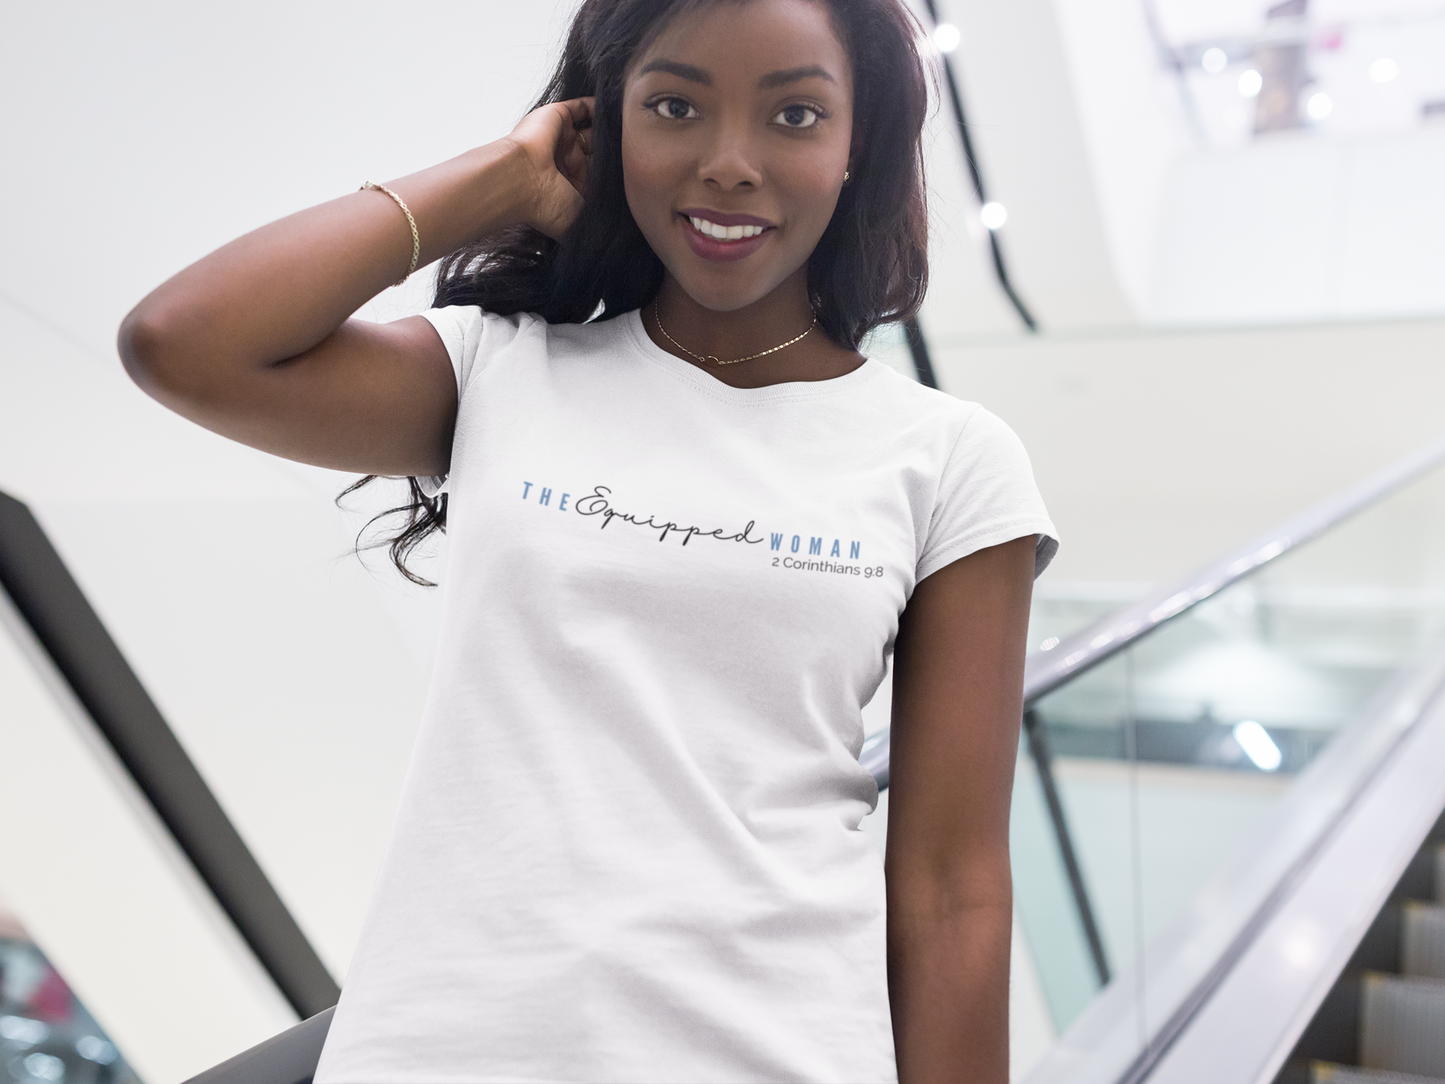 The Equipped Woman Signature Tee